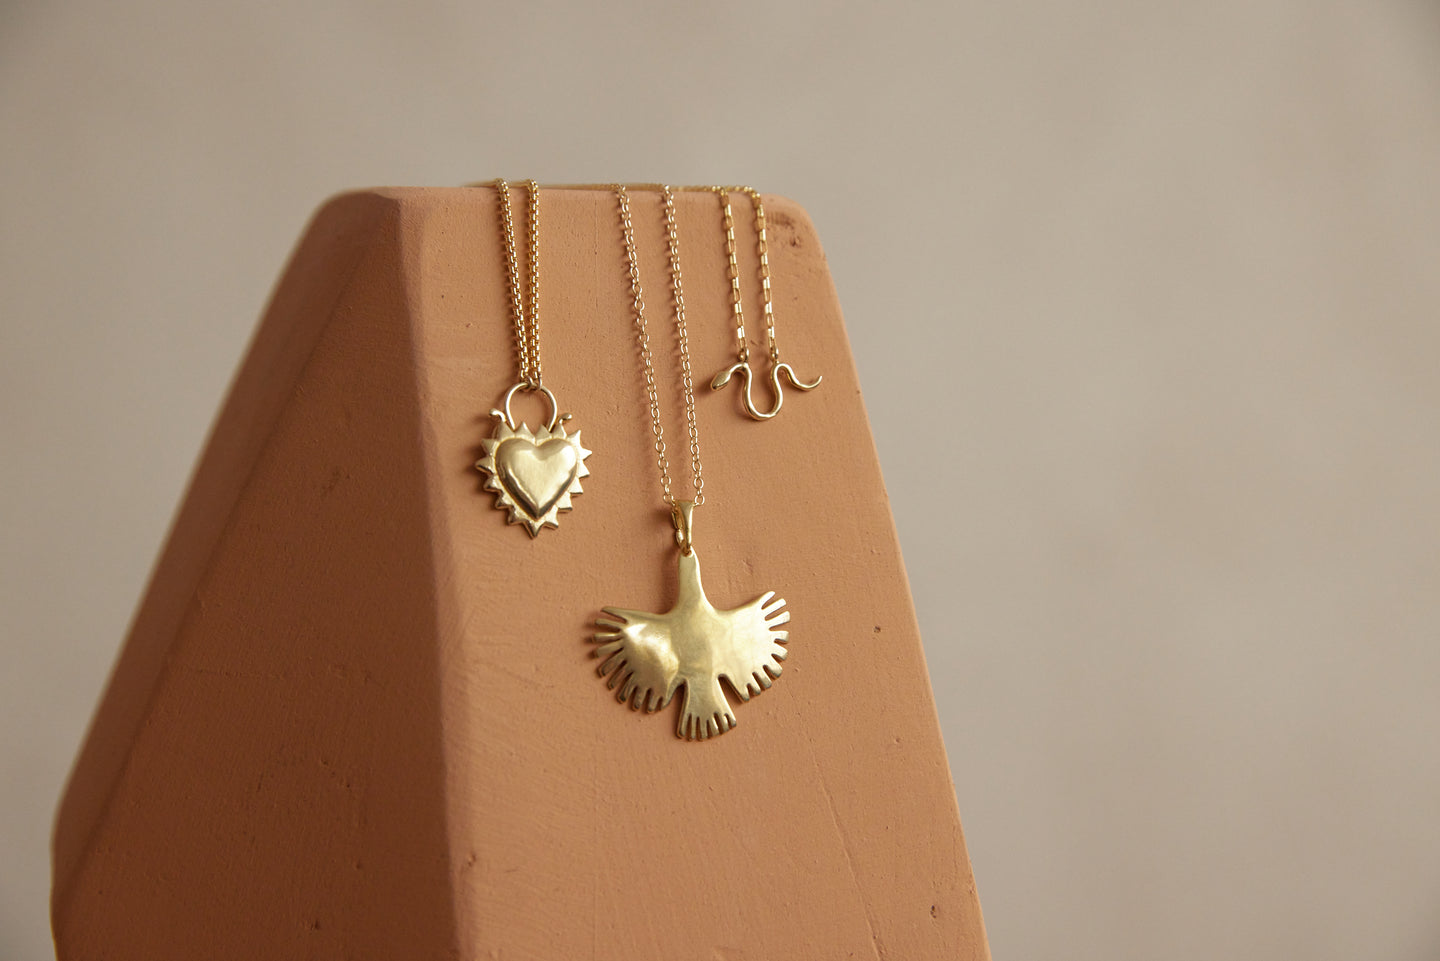 Three brass necklaces with a heart, a snake, and a bird charm hang on pink wood block.Brass and Sterling Silver necklaces, delicate and statement necklaces, evil eye charm, delicate charms, 14k gold necklaces, brass necklaces, handmade jewelry in Oakland.